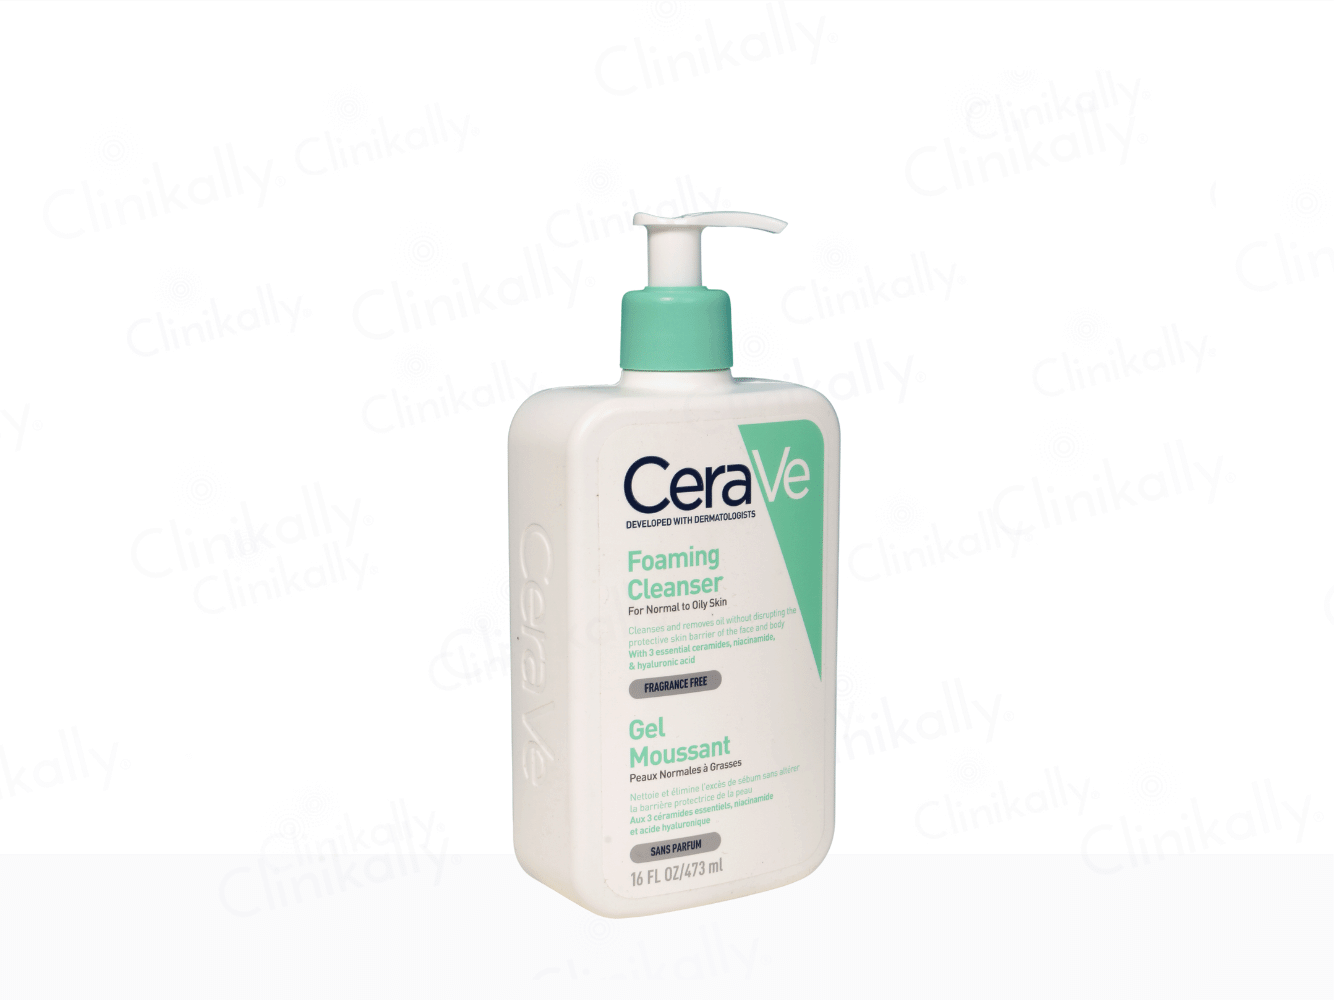 CeraVe Foaming Cleanser for Normal to Oily Skin - Clinikally